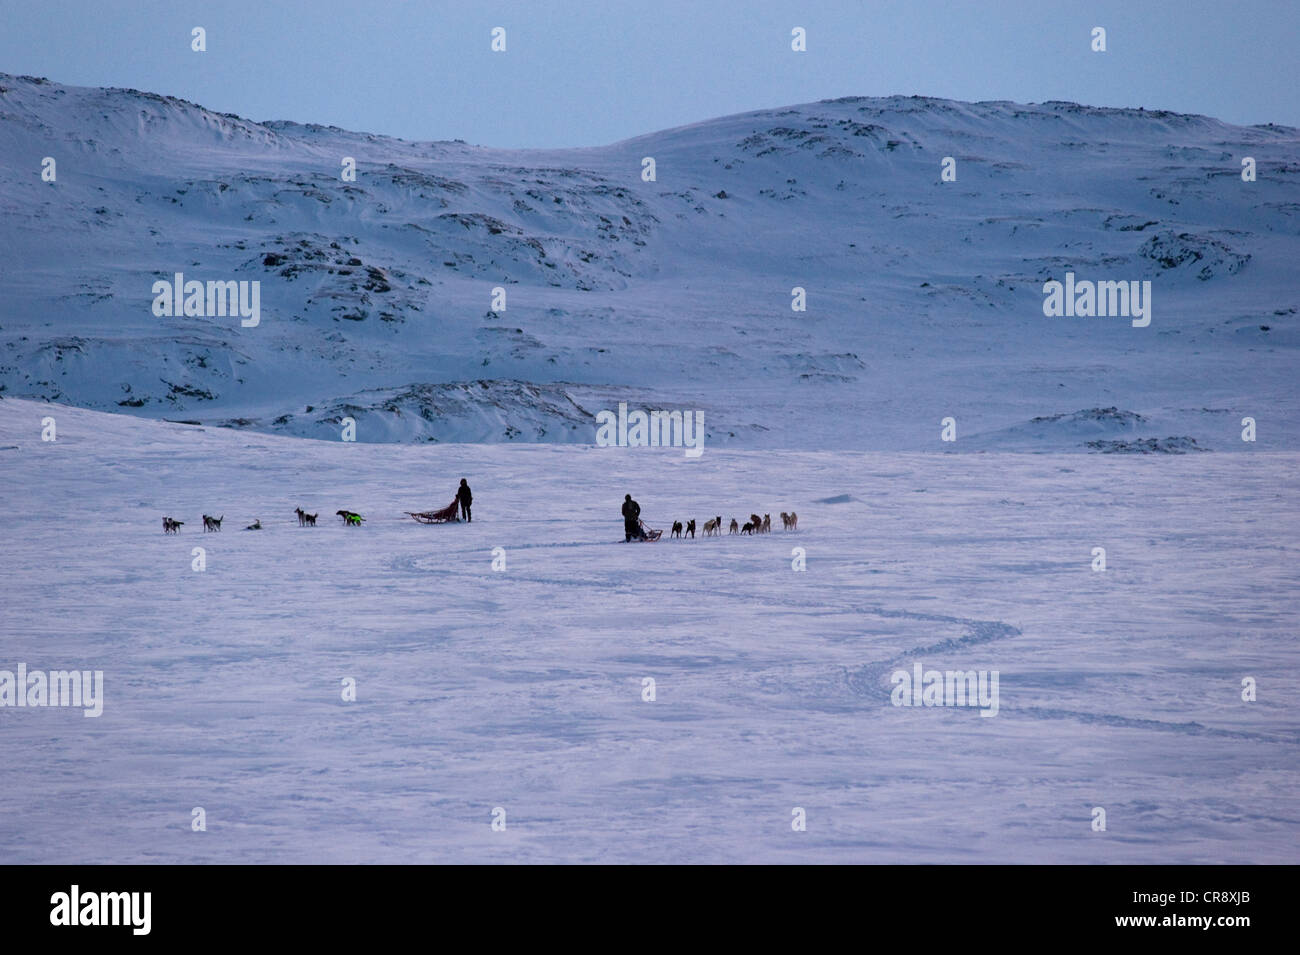 Two sled mushers with dog teams on Finnmarksvidda plateau during training for the Finnmarksløpet sled dog race, Alta, Finnmark Stock Photo